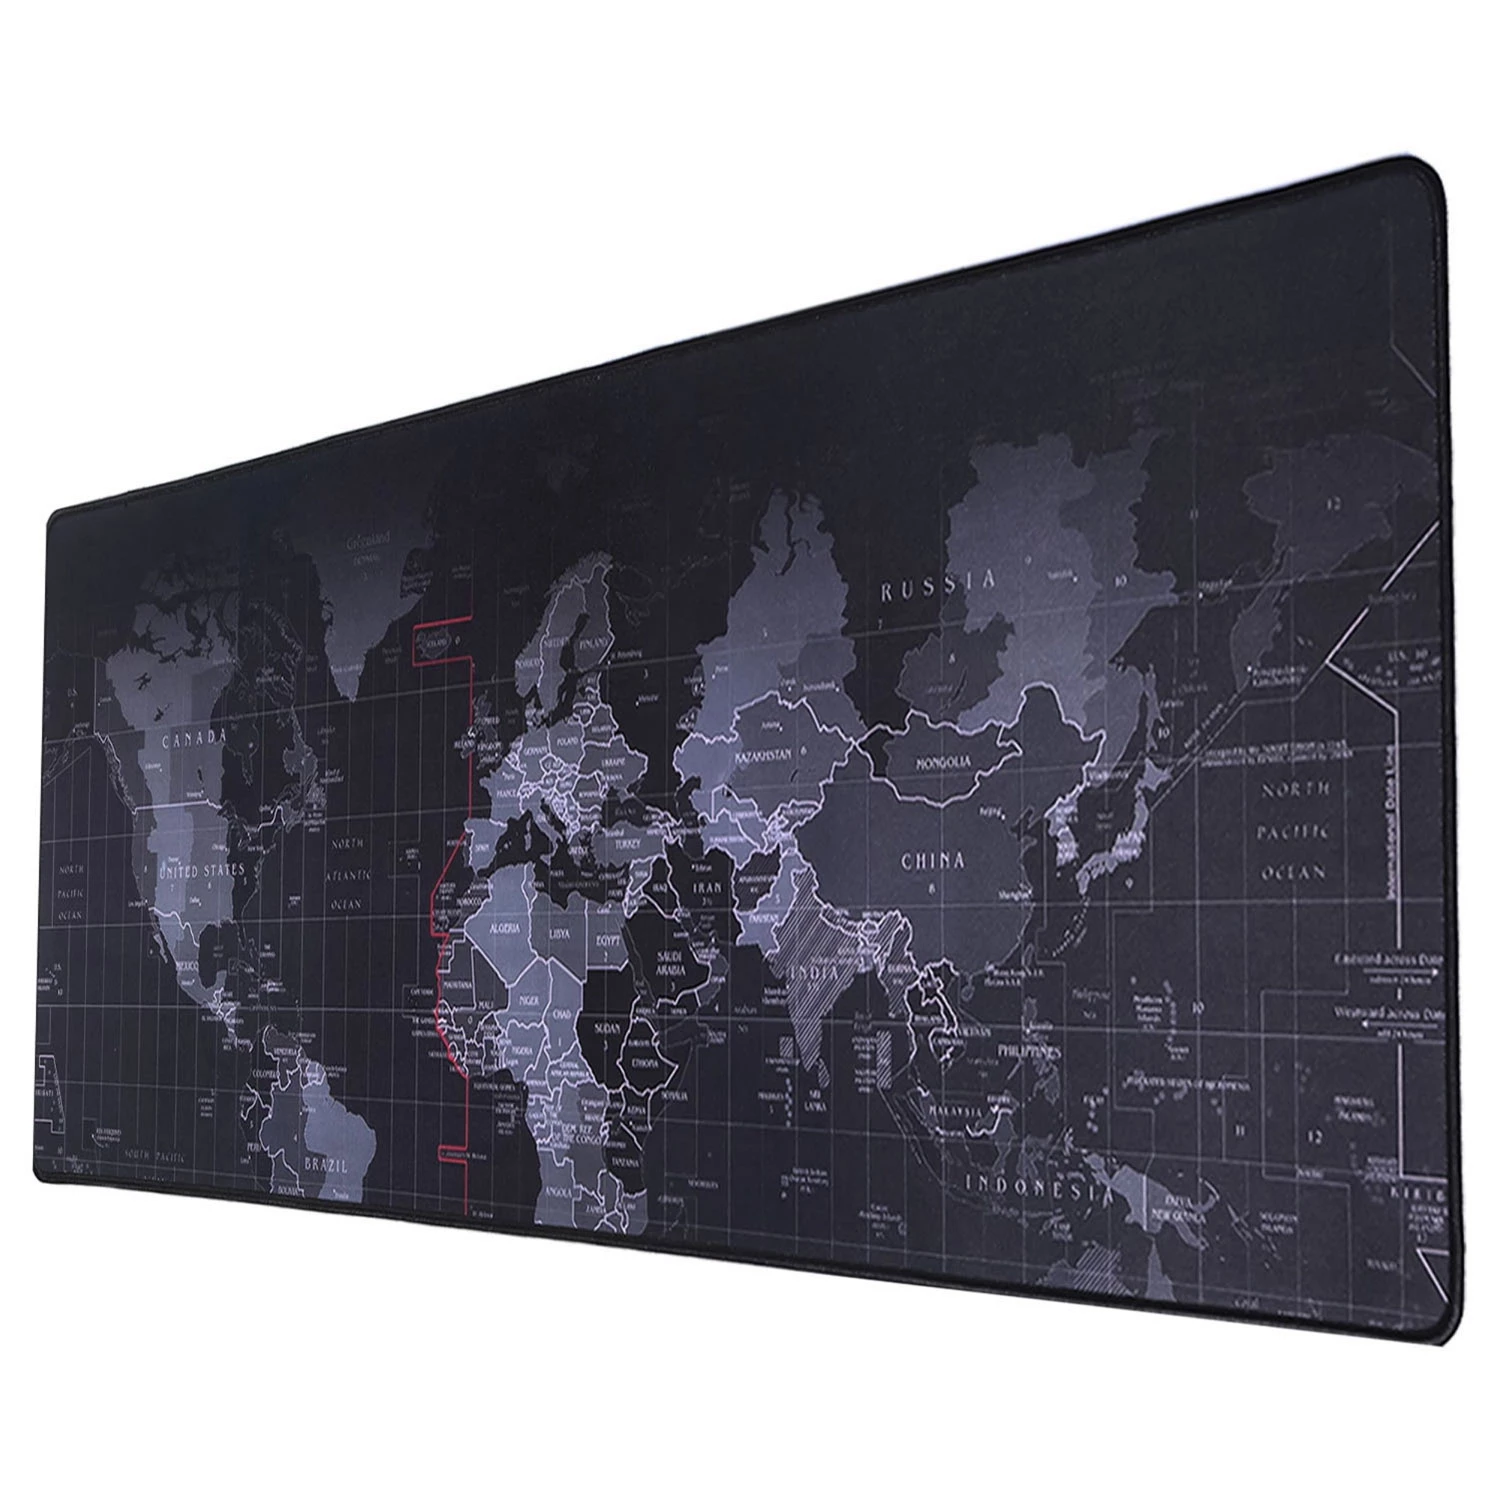 World Map Gaming Mouse Pad 31.0"x11.5" (3.0mm) - Non-Slip Rubber Base, Durable Stitched Edges